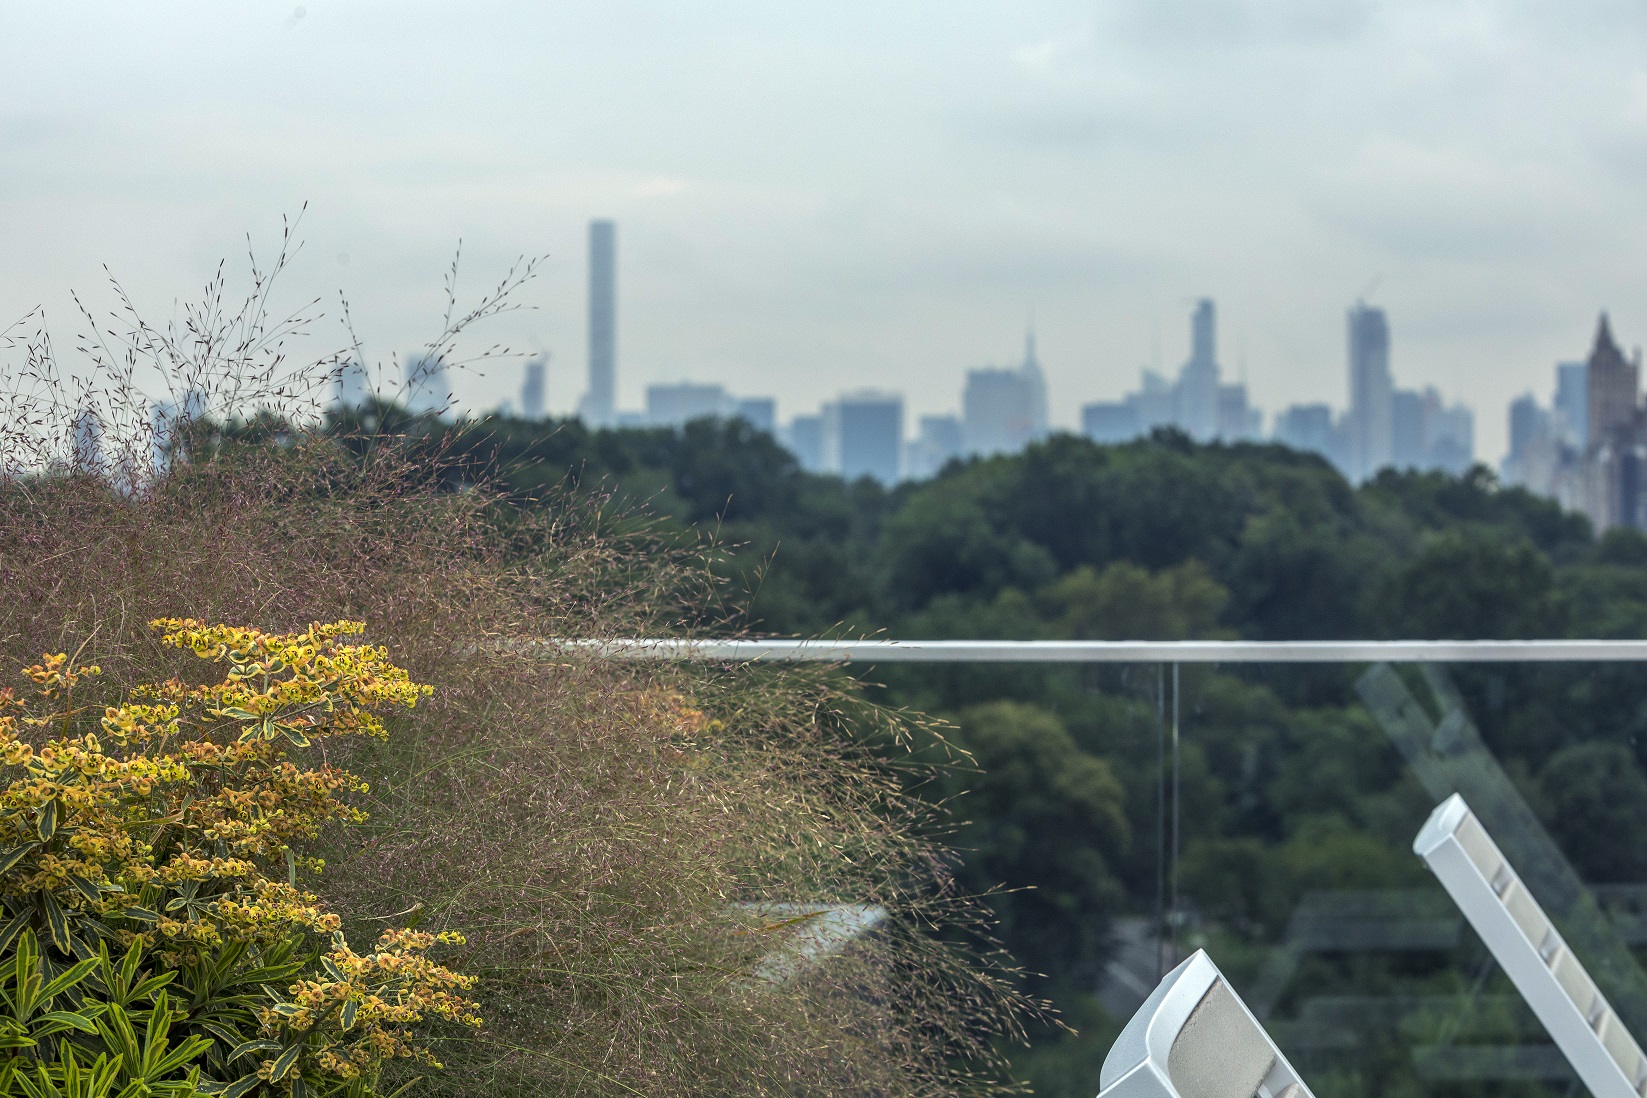 Breathtaking Central Park views are complemented by expertly installed landscape elements, creating a beautiful amenity for the